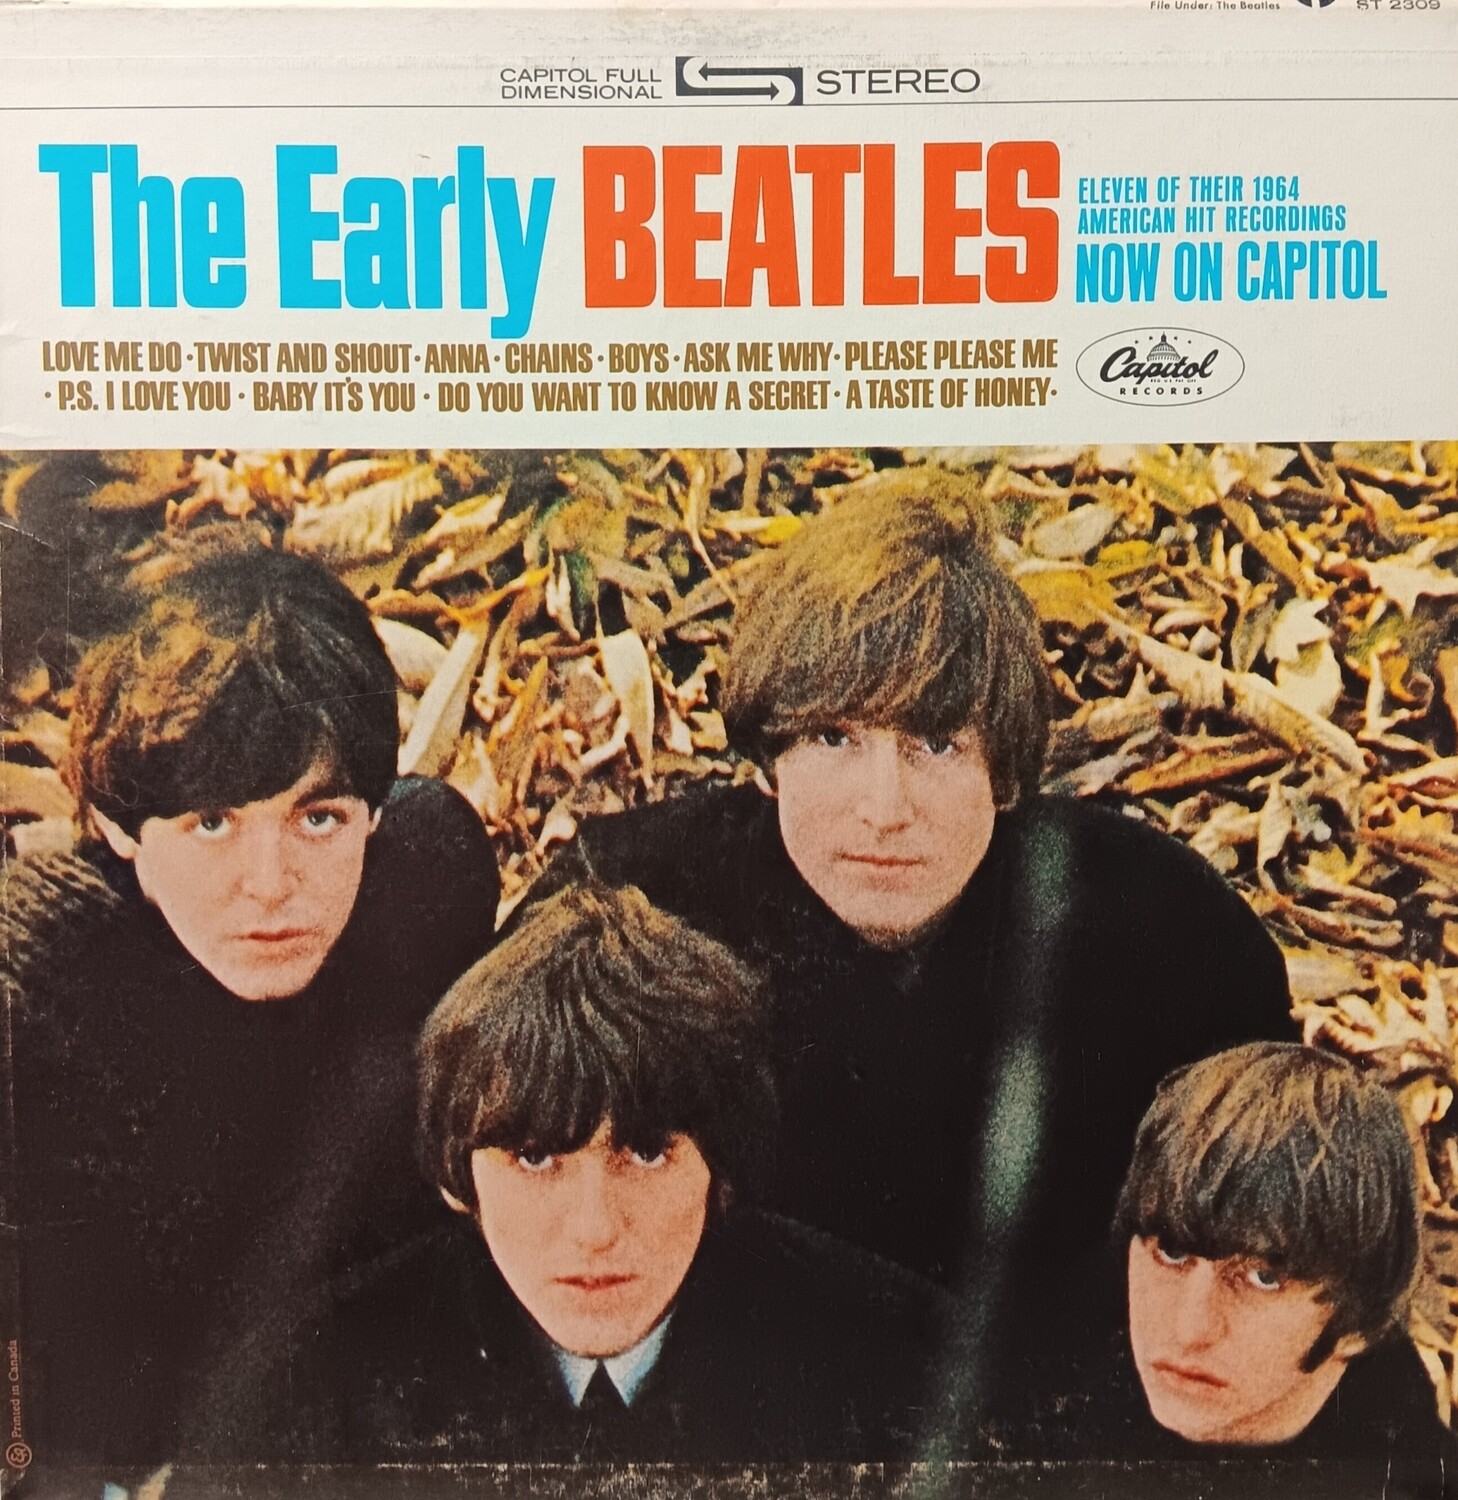 THE BEATLES - The Early Beatles